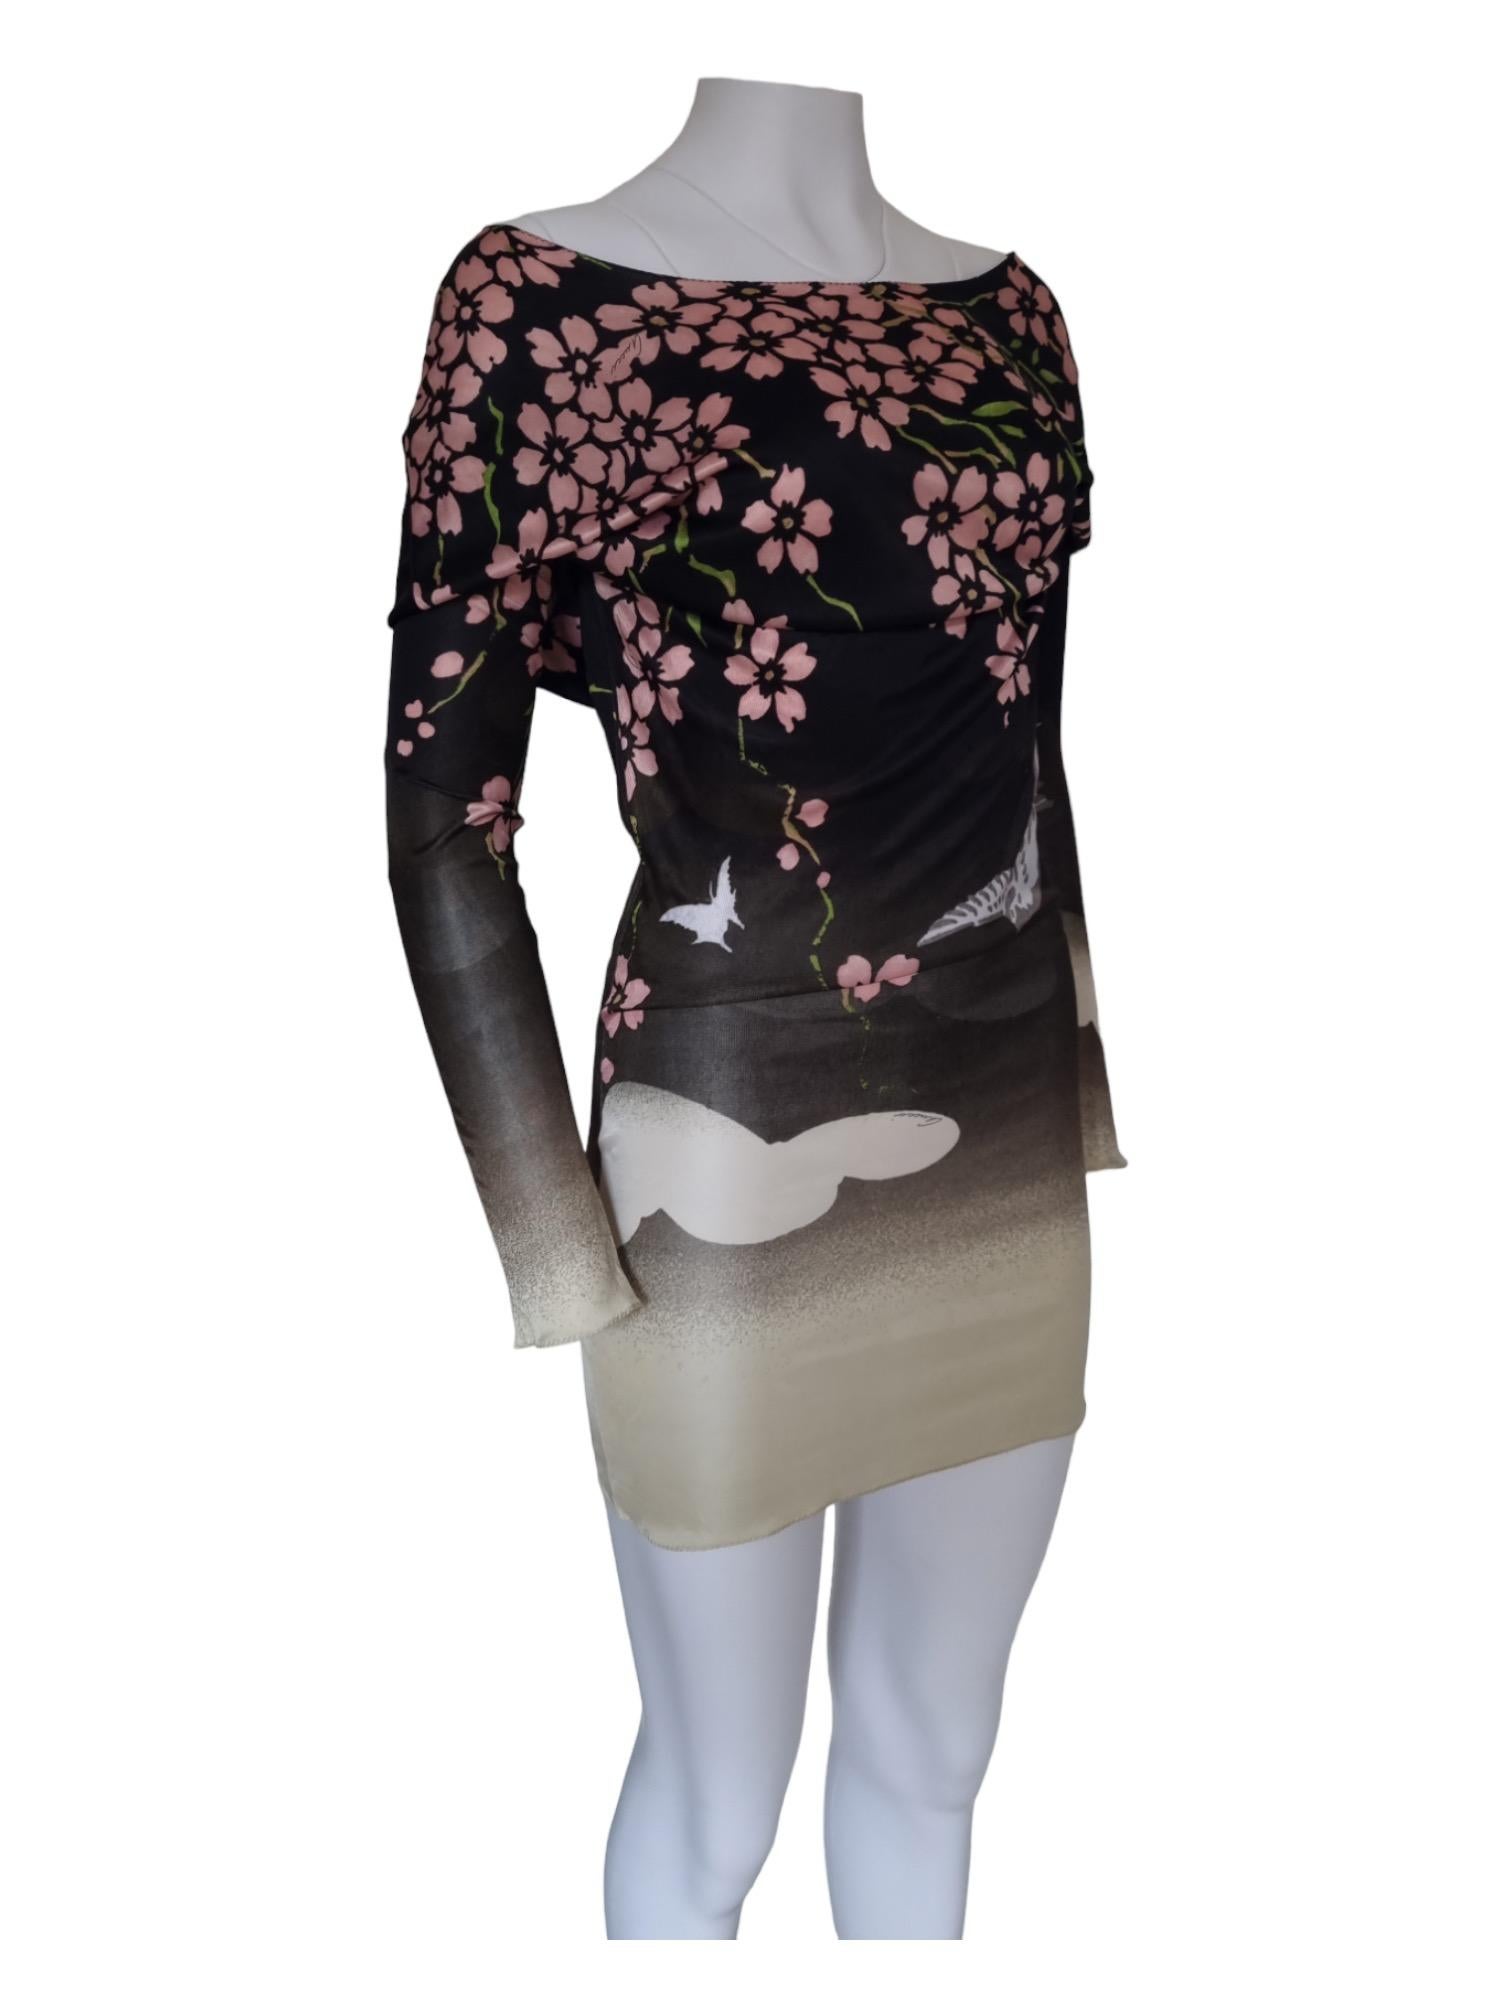 Gucci by Tom Ford cherry blossom dress, SS 2003 In Excellent Condition For Sale In London, GB